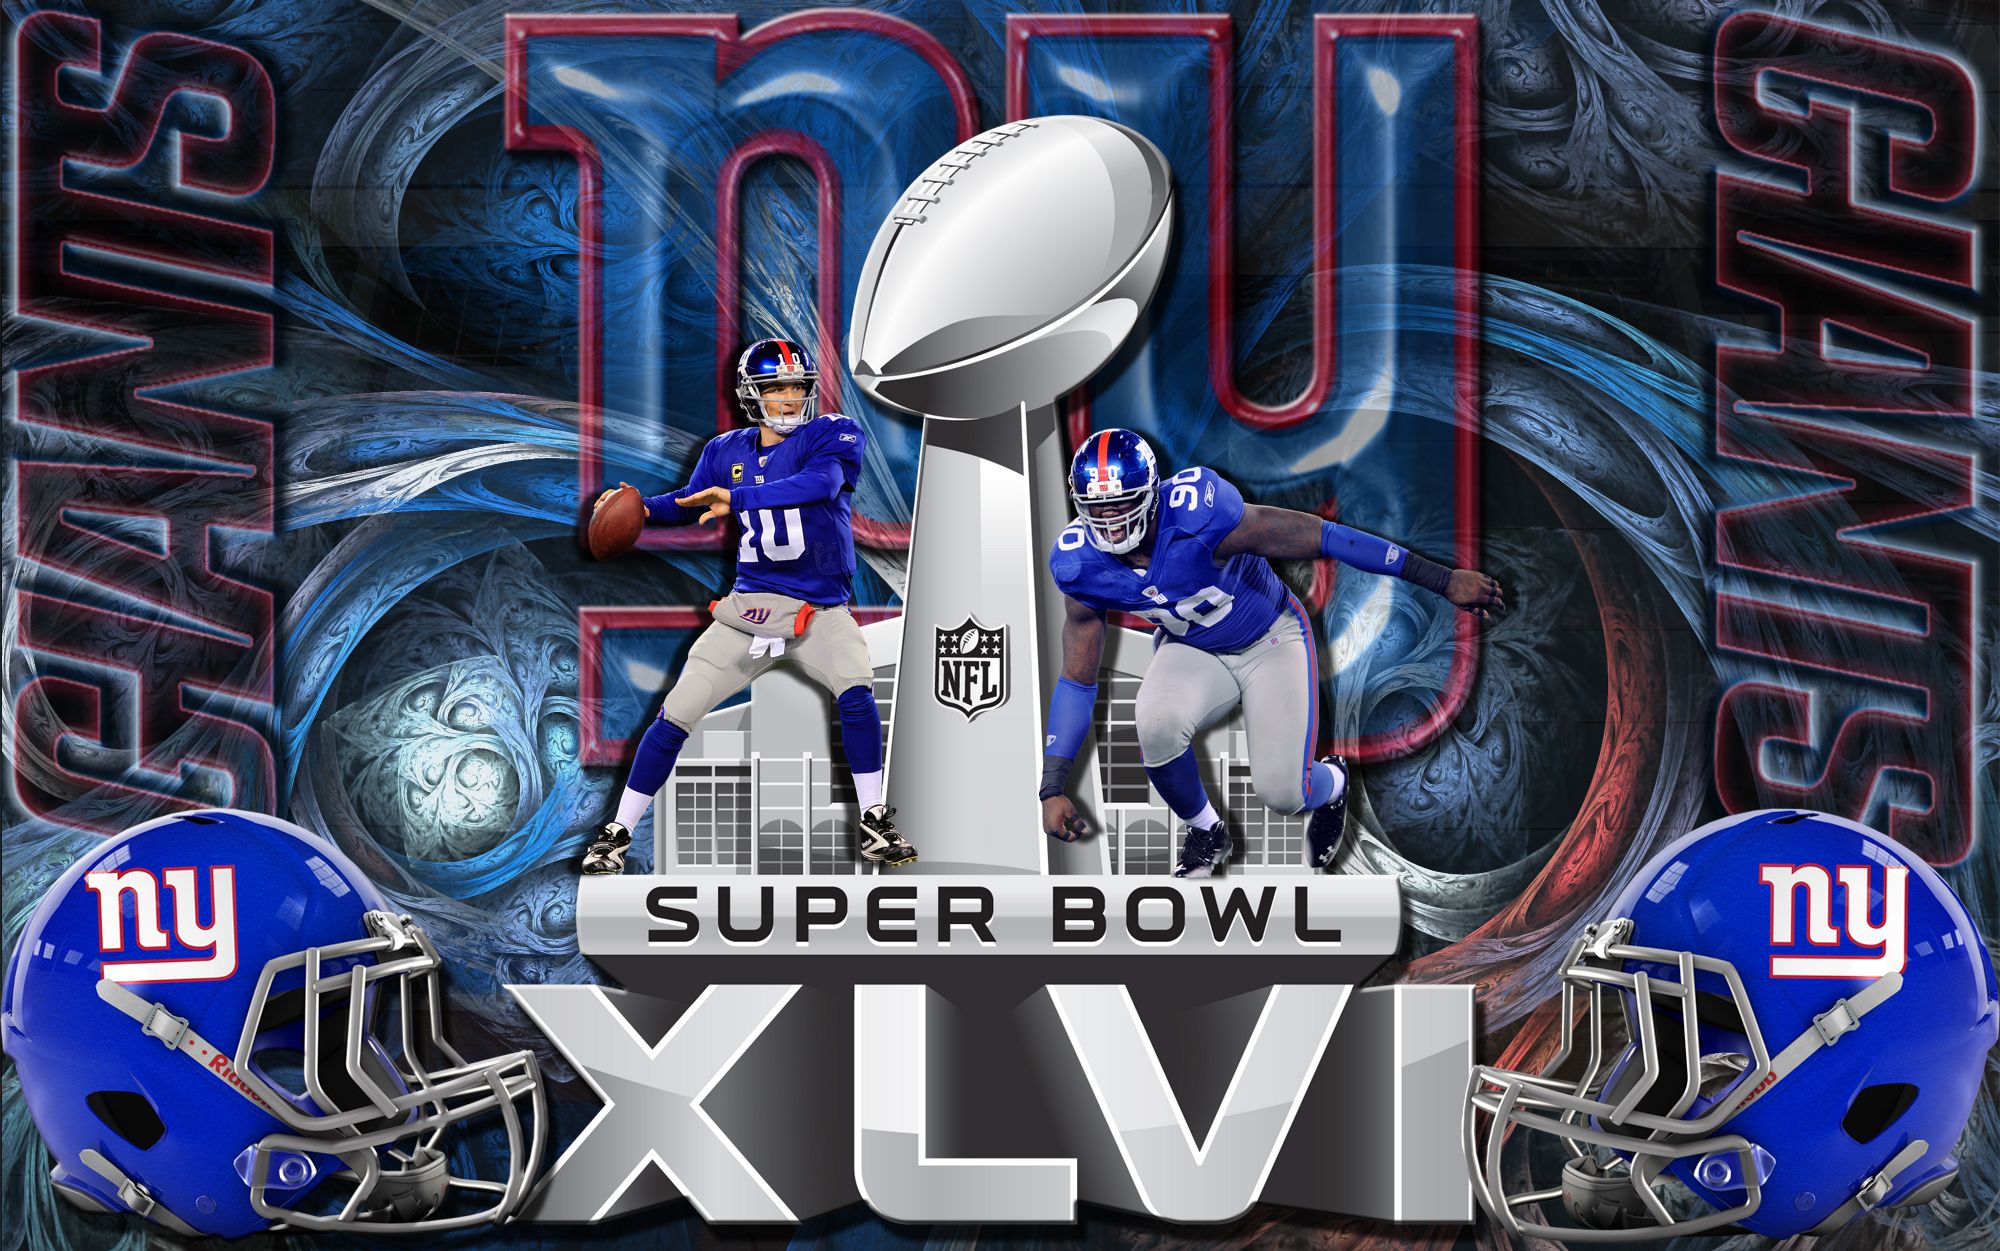 Awesome New York Giants wallpaper hd | cute Wallpapers